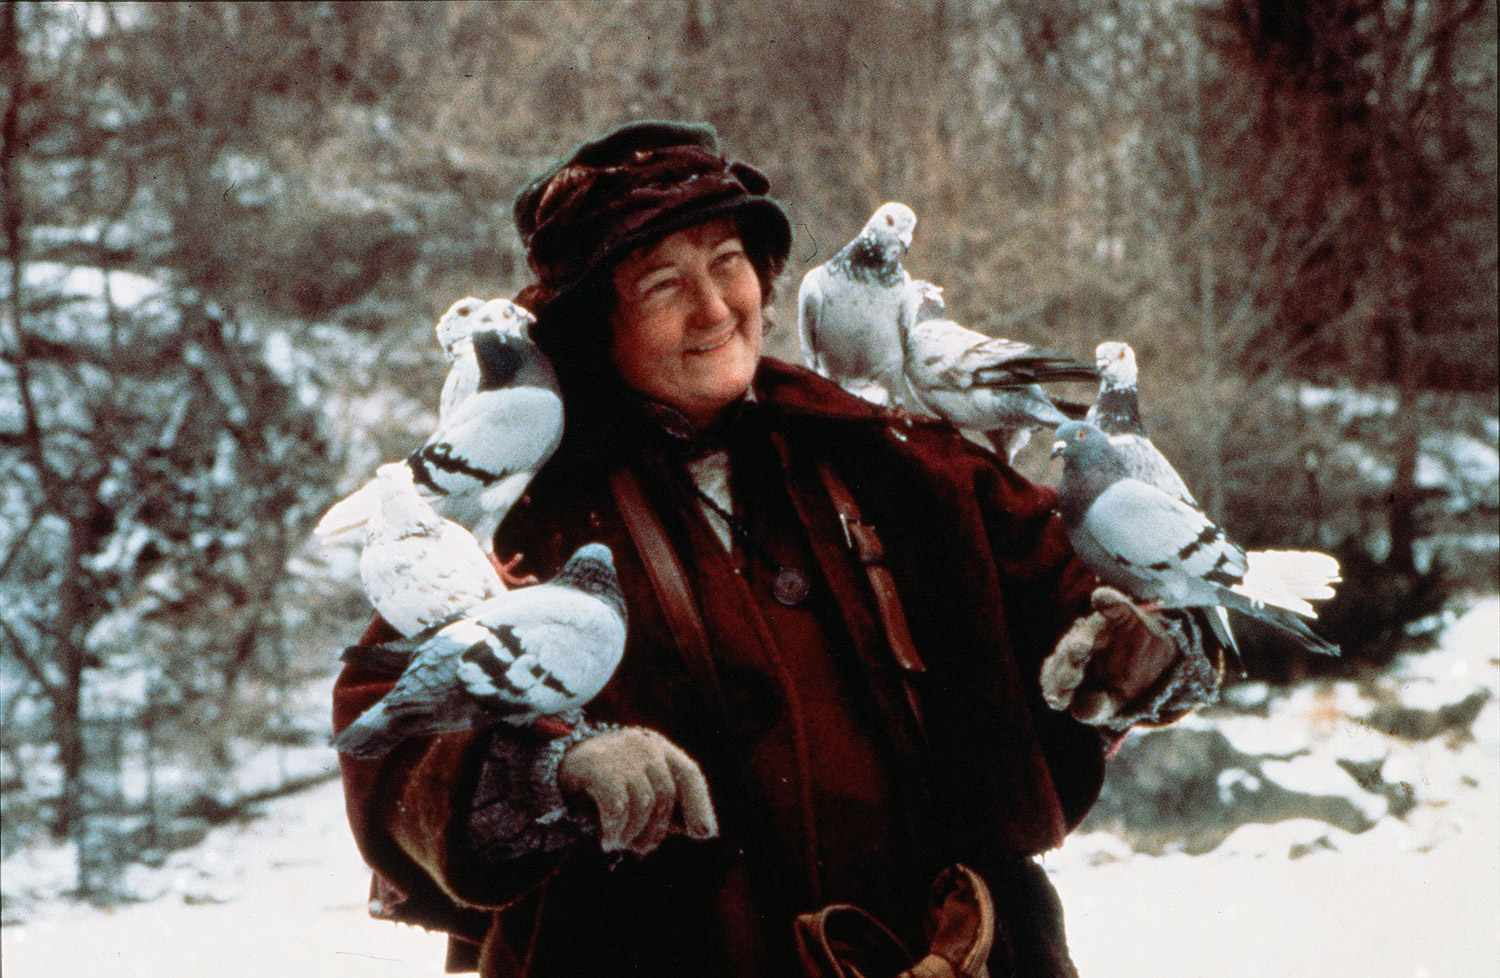 Pigeon Lady from Home Alone has changed beyond recognition: she faced abuse from her mother and tried to kill herself 32 times